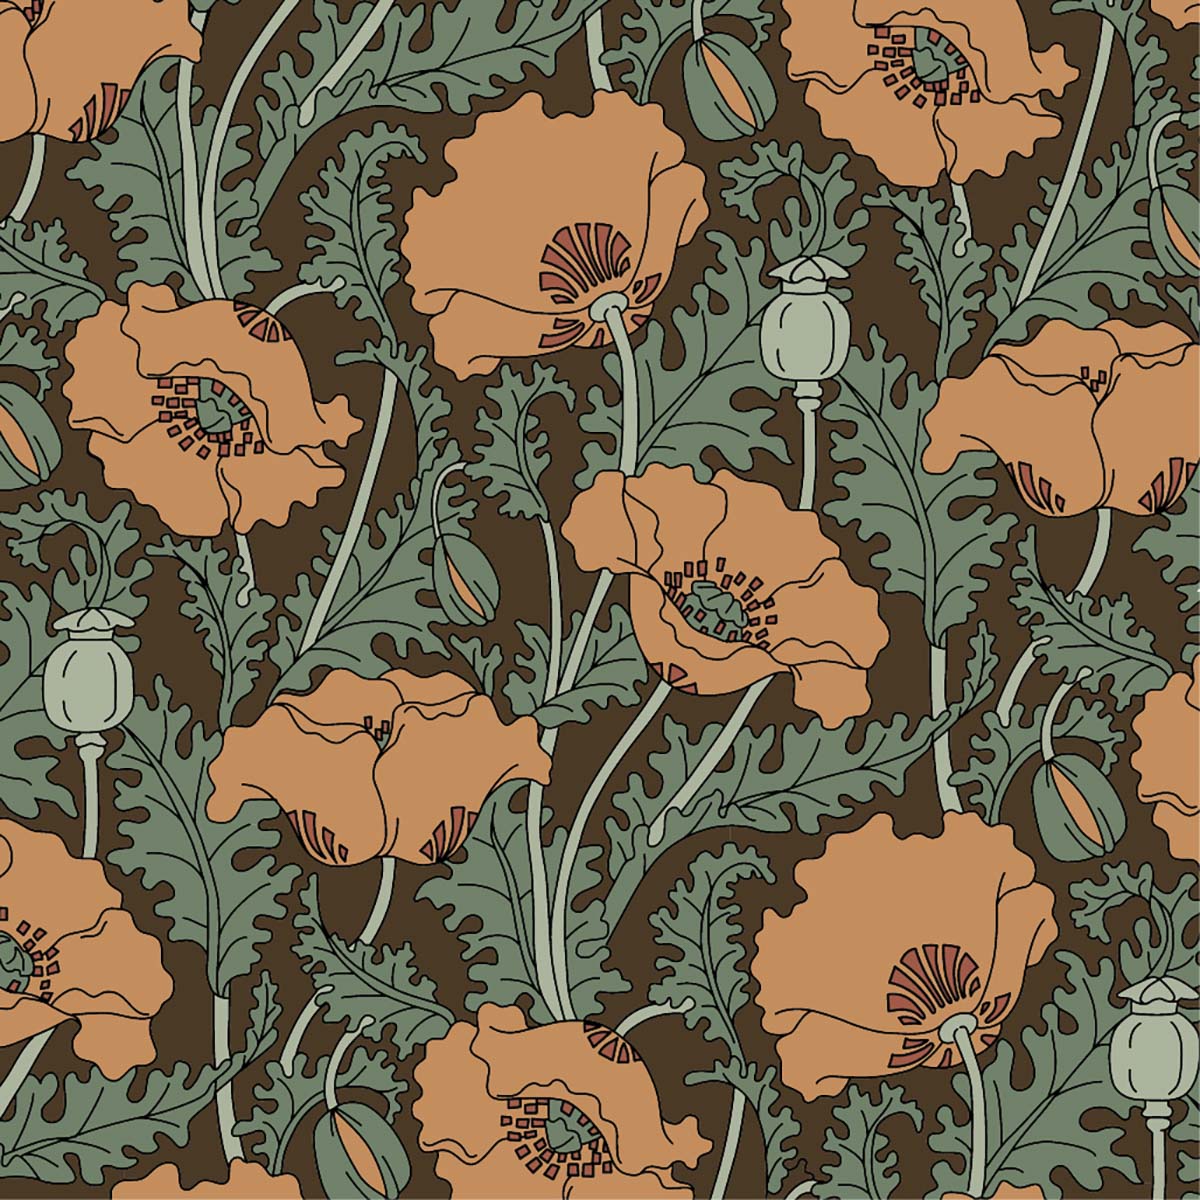 A pattern of orange flowers and green leaves